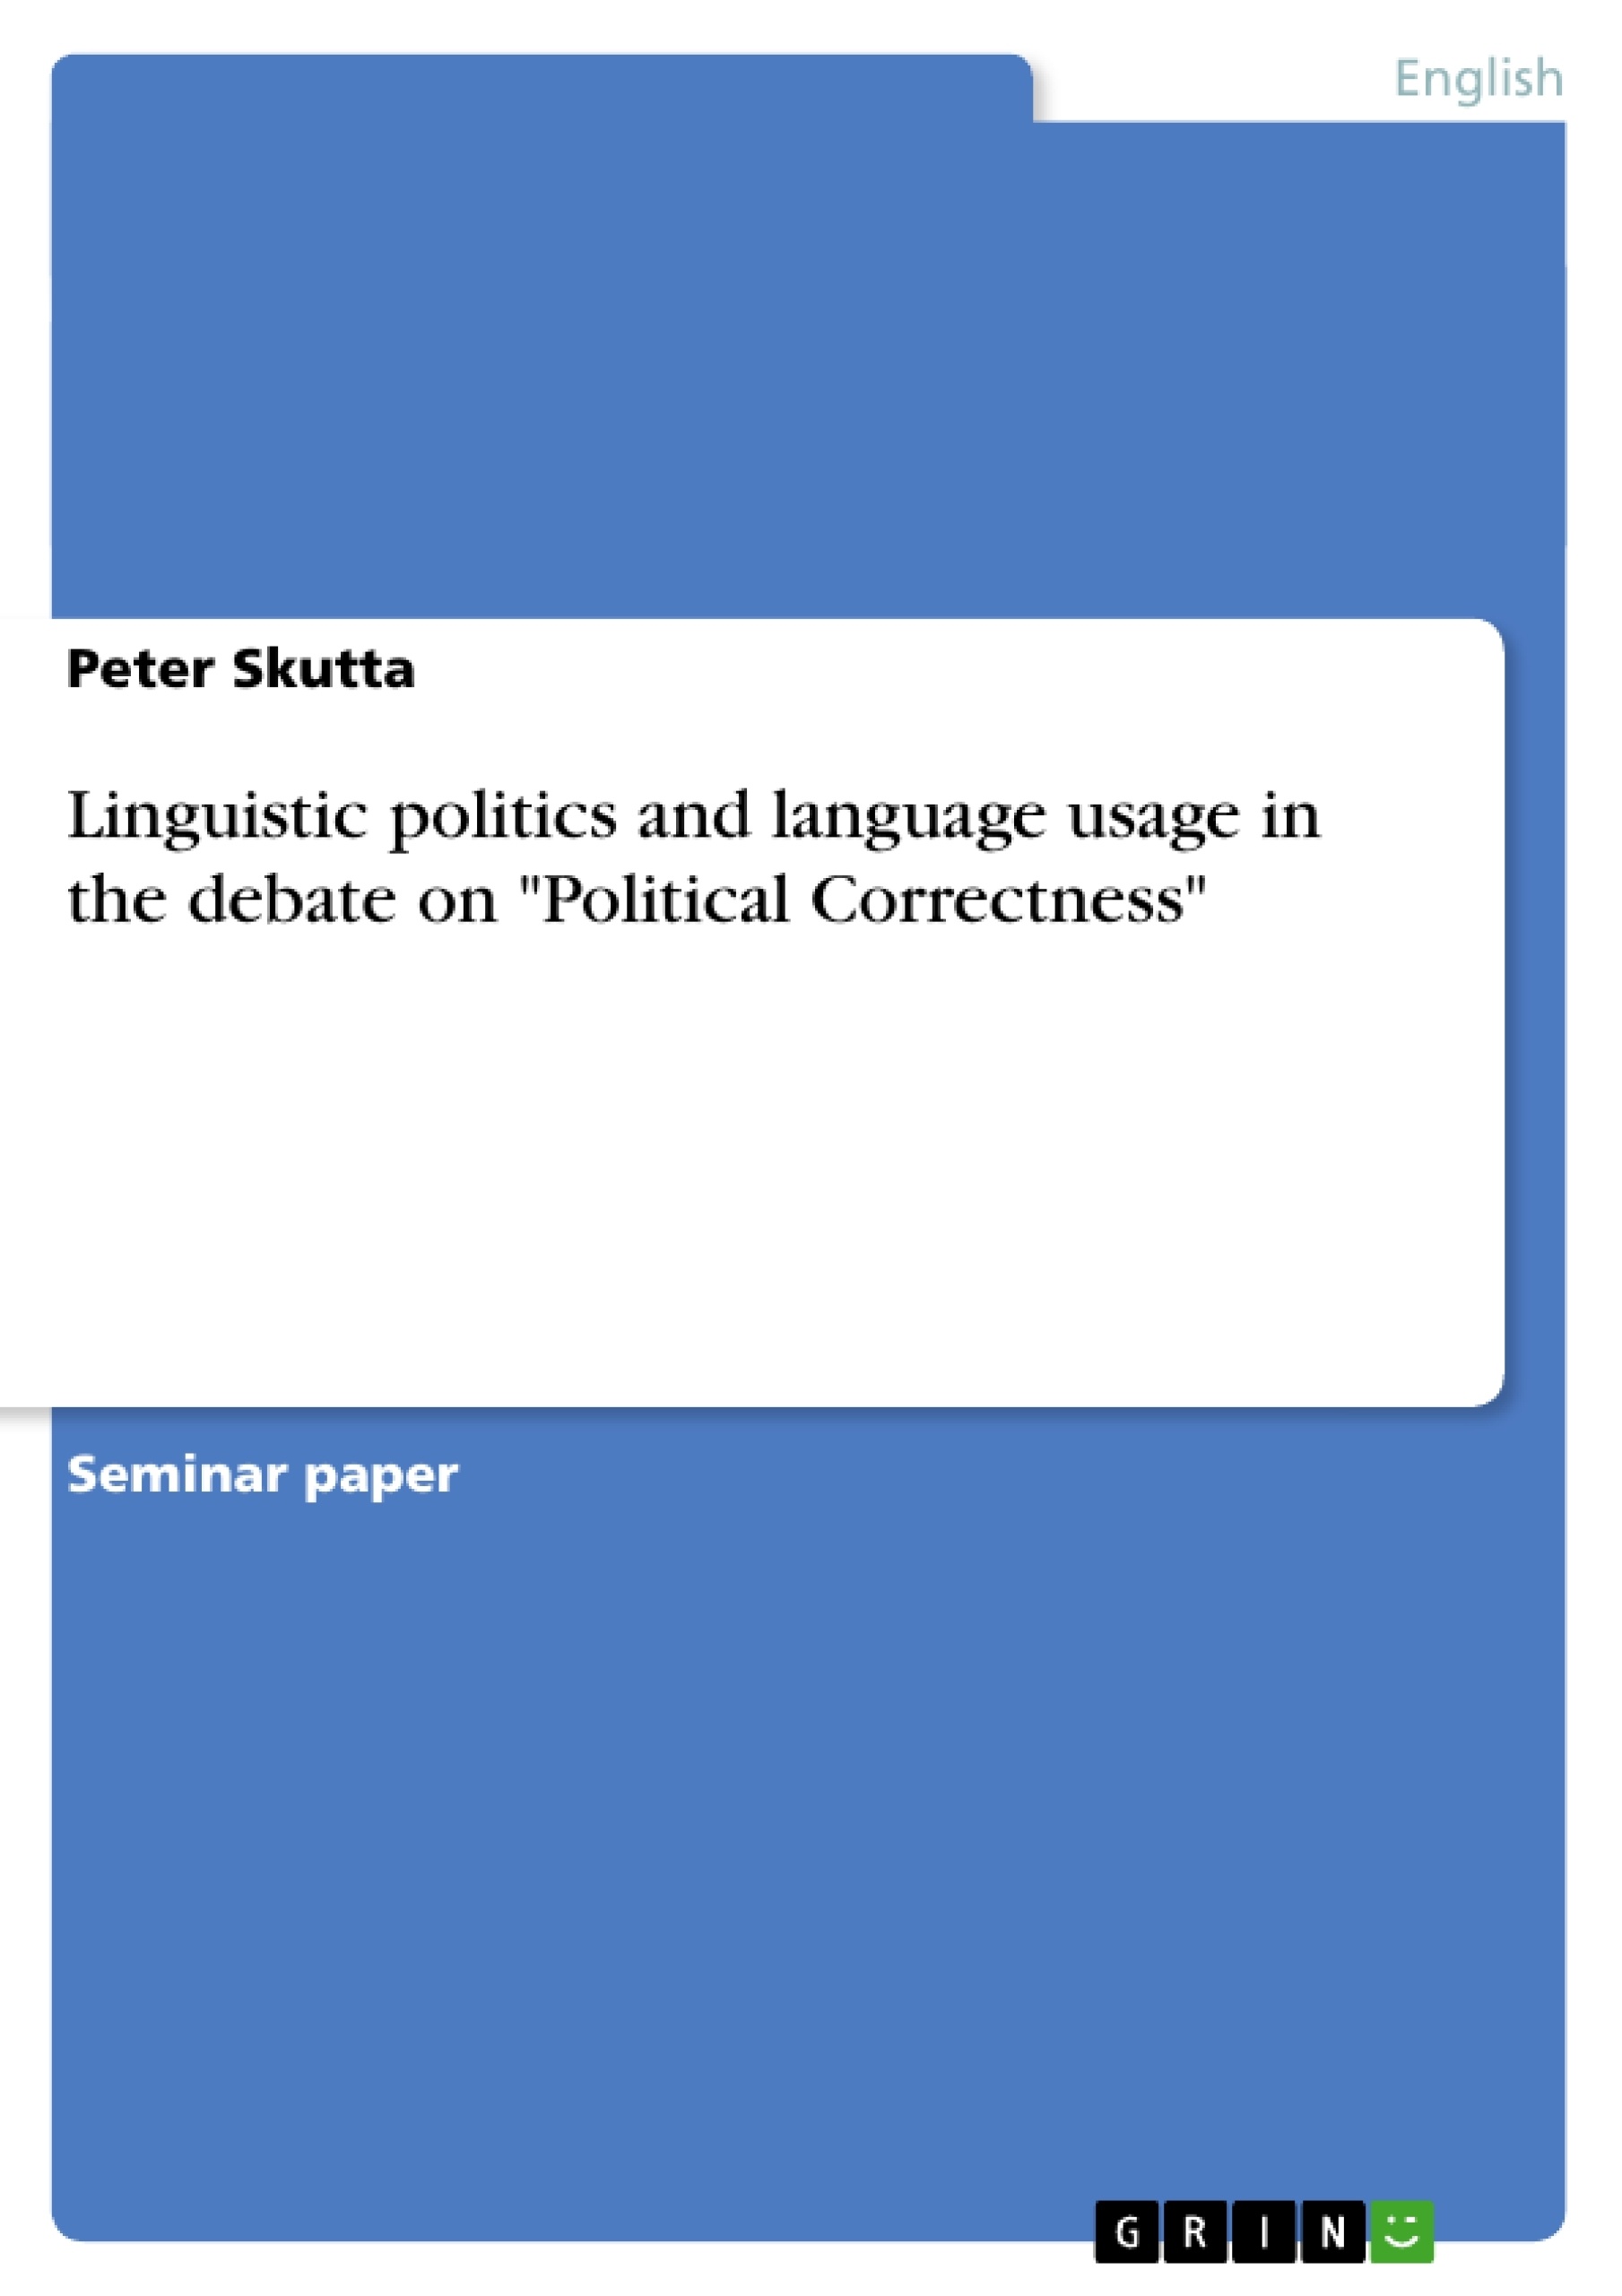 Titre: Linguistic politics and language usage in the debate on "Political Correctness"